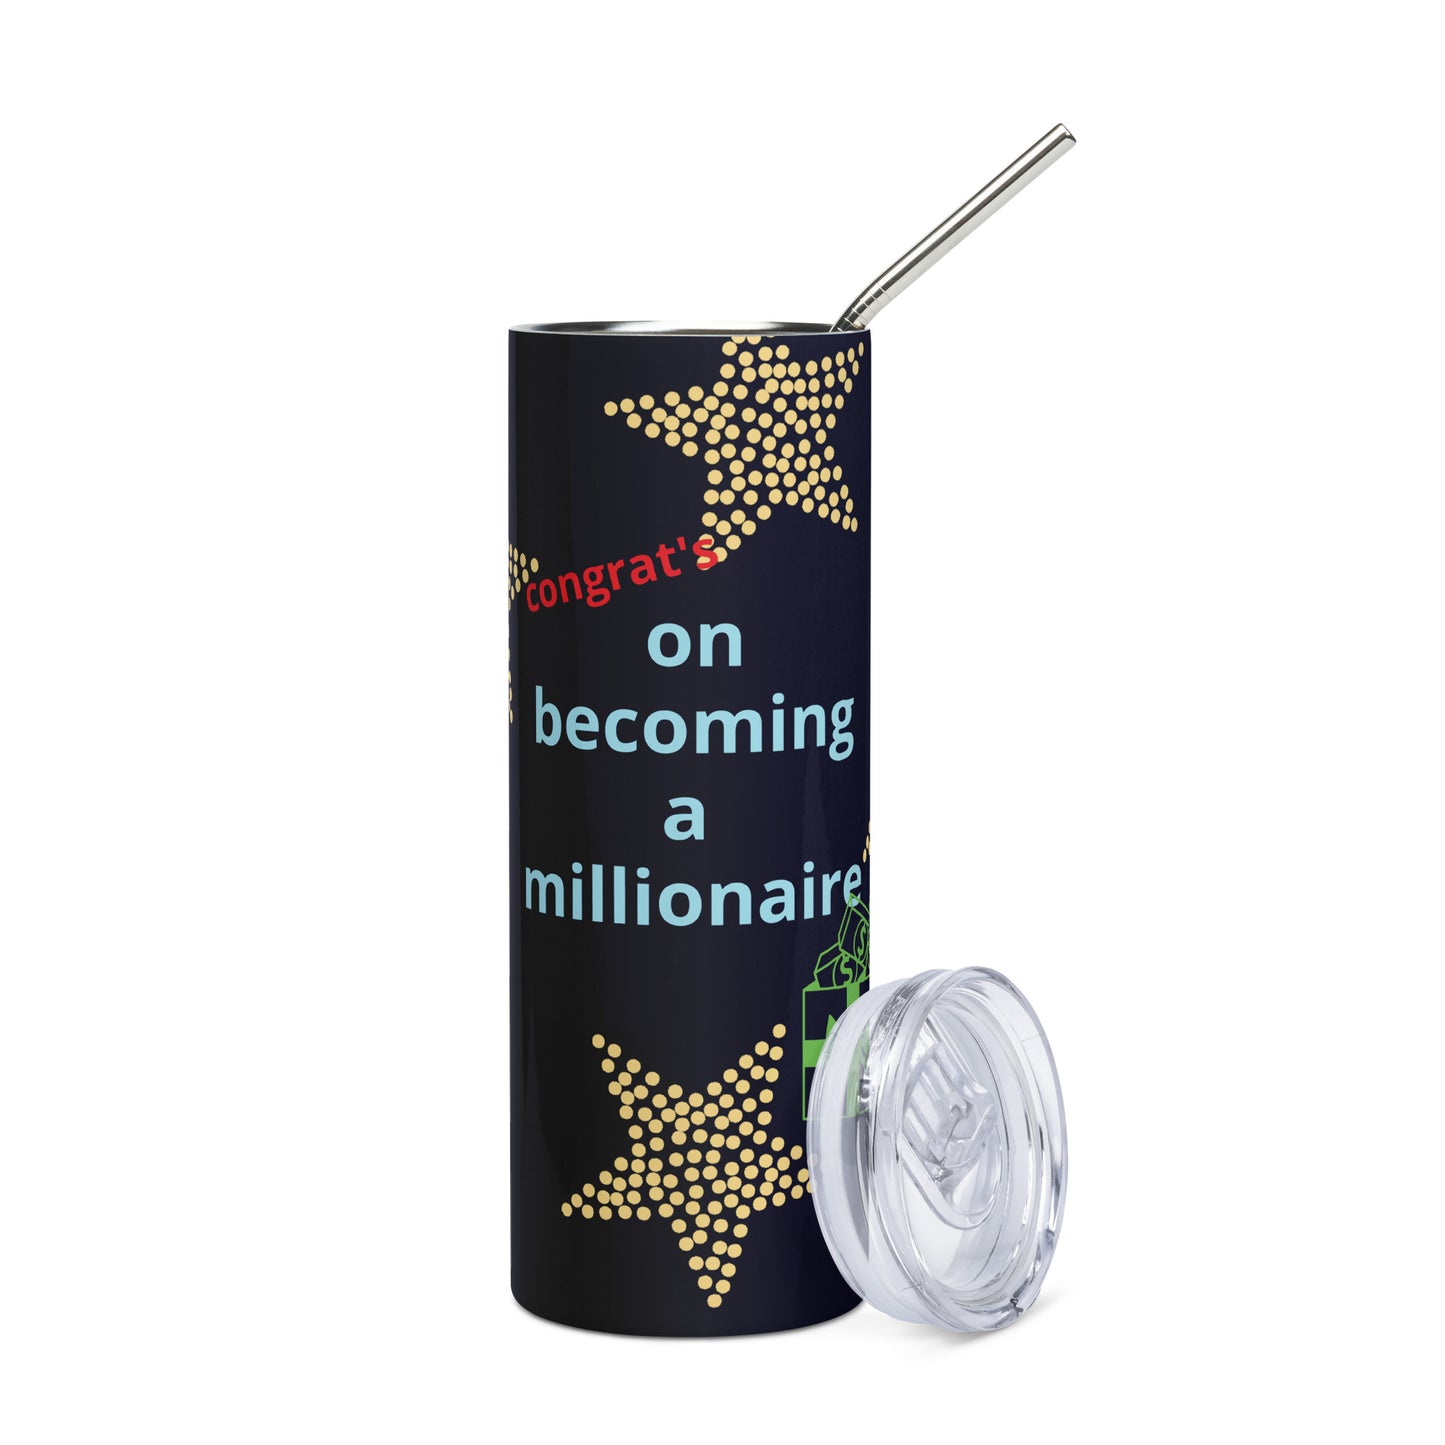 congrats on becoming a millionaire Stainless steel tumbler